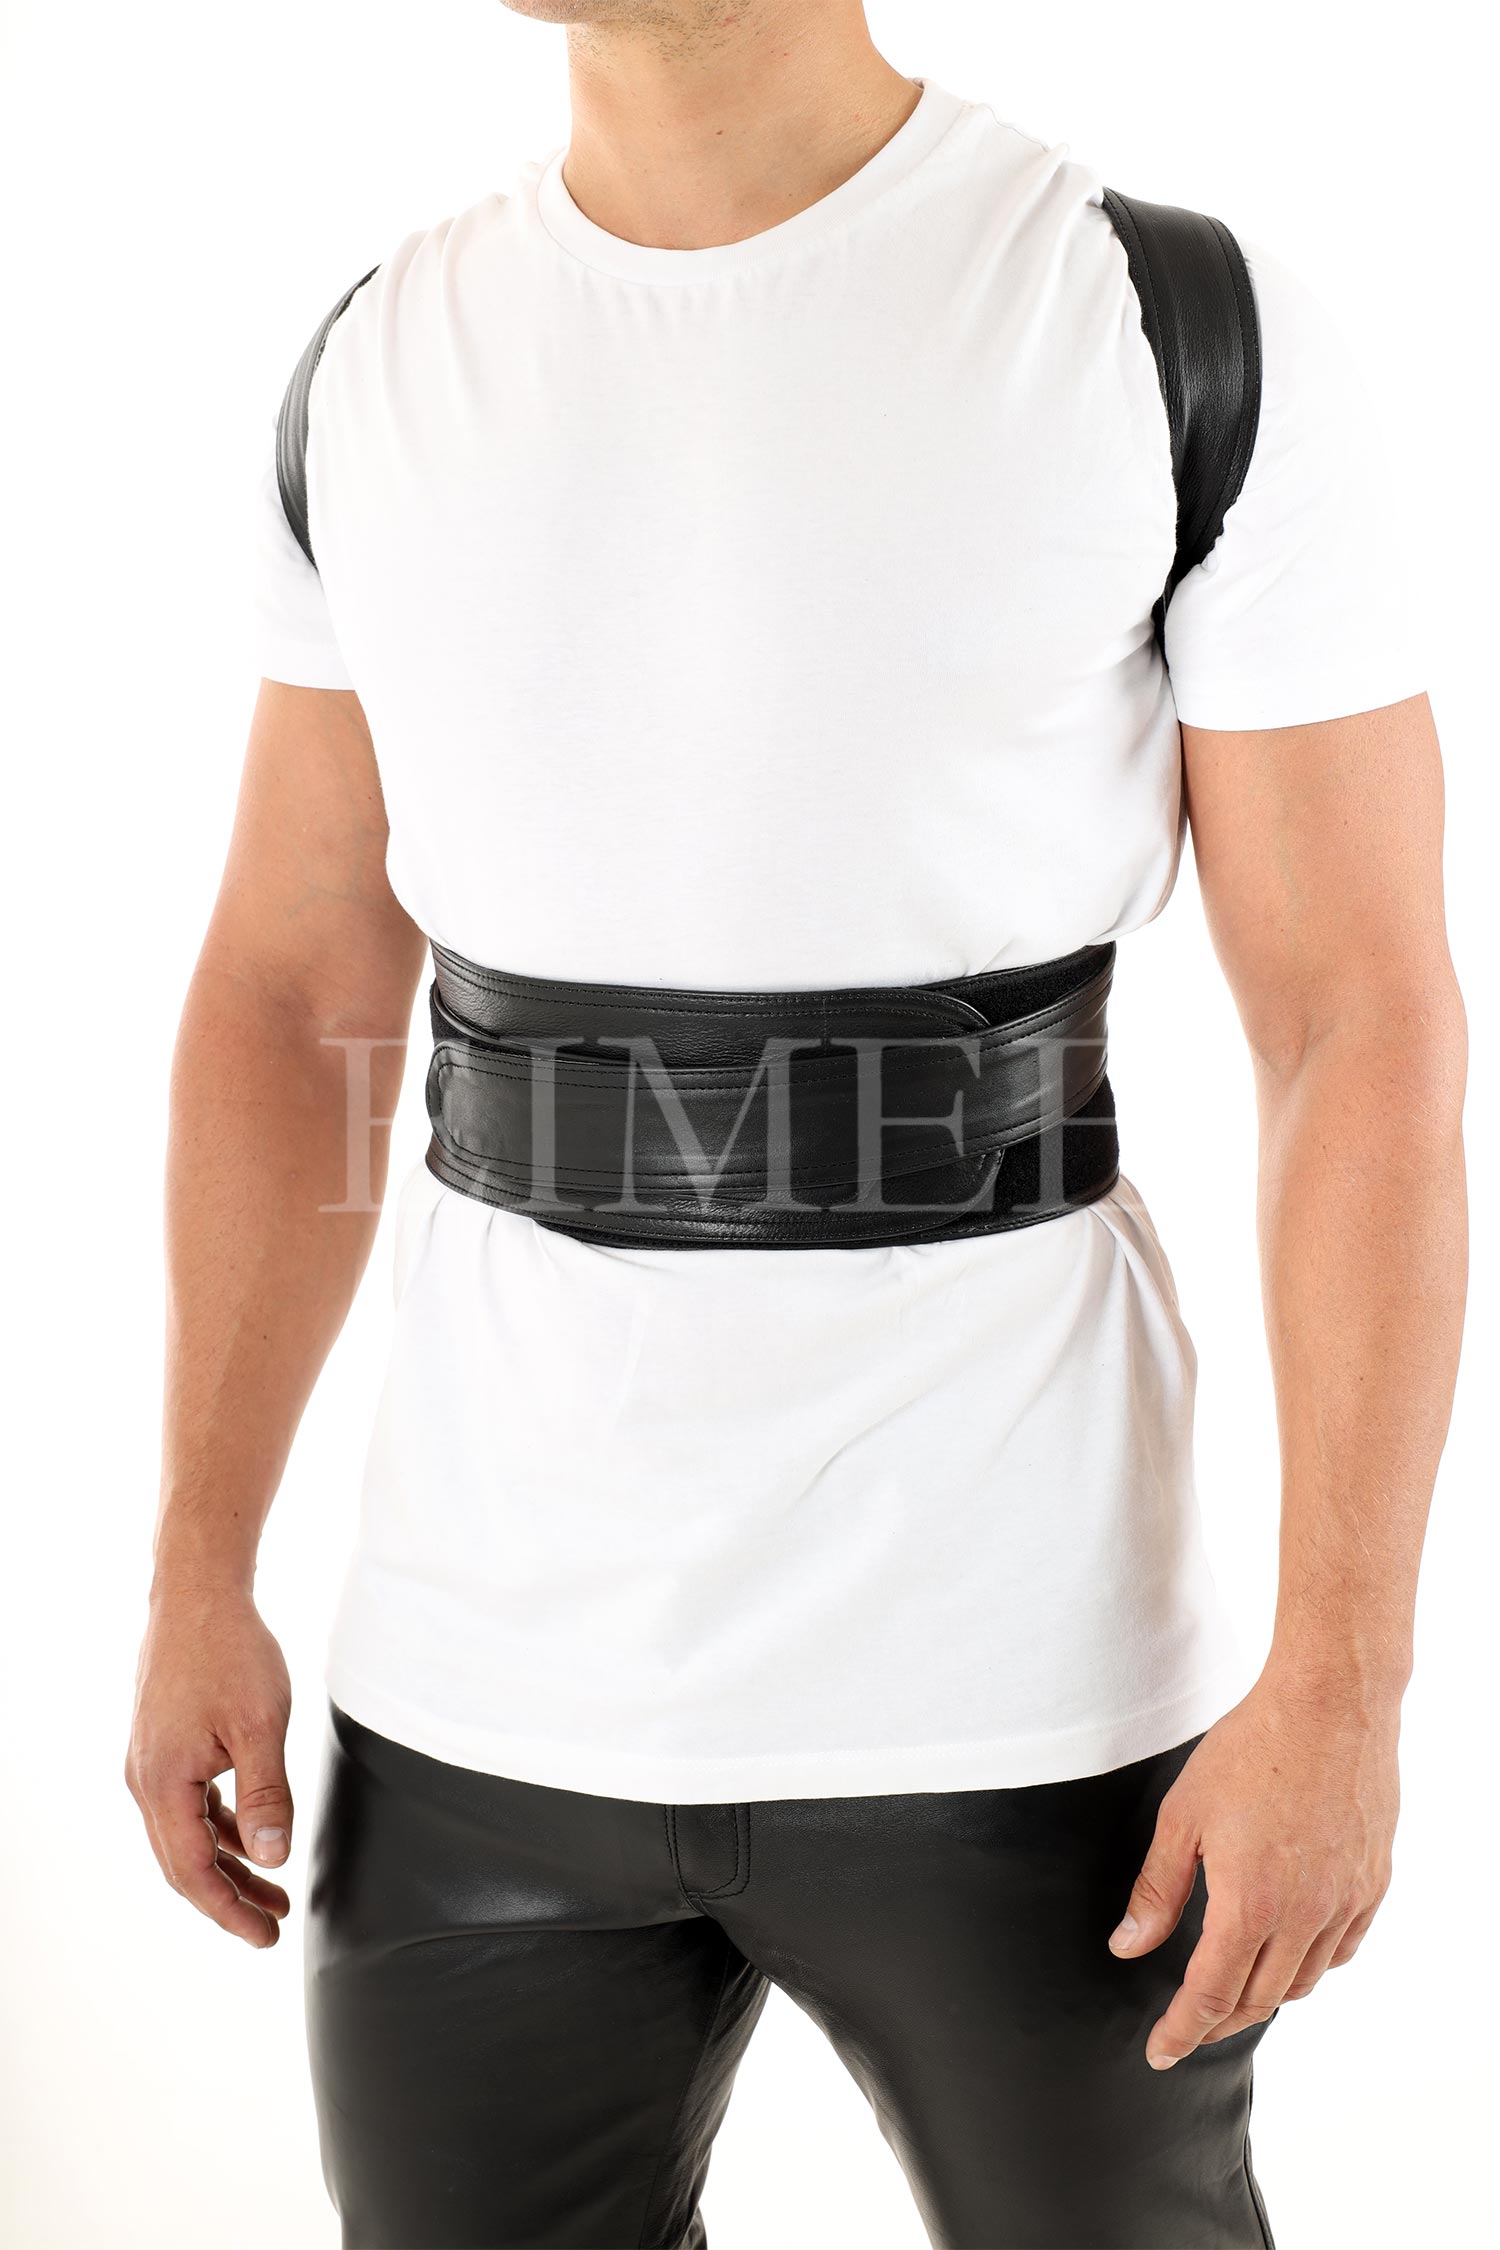 Leather Posture Corrector Support for Men